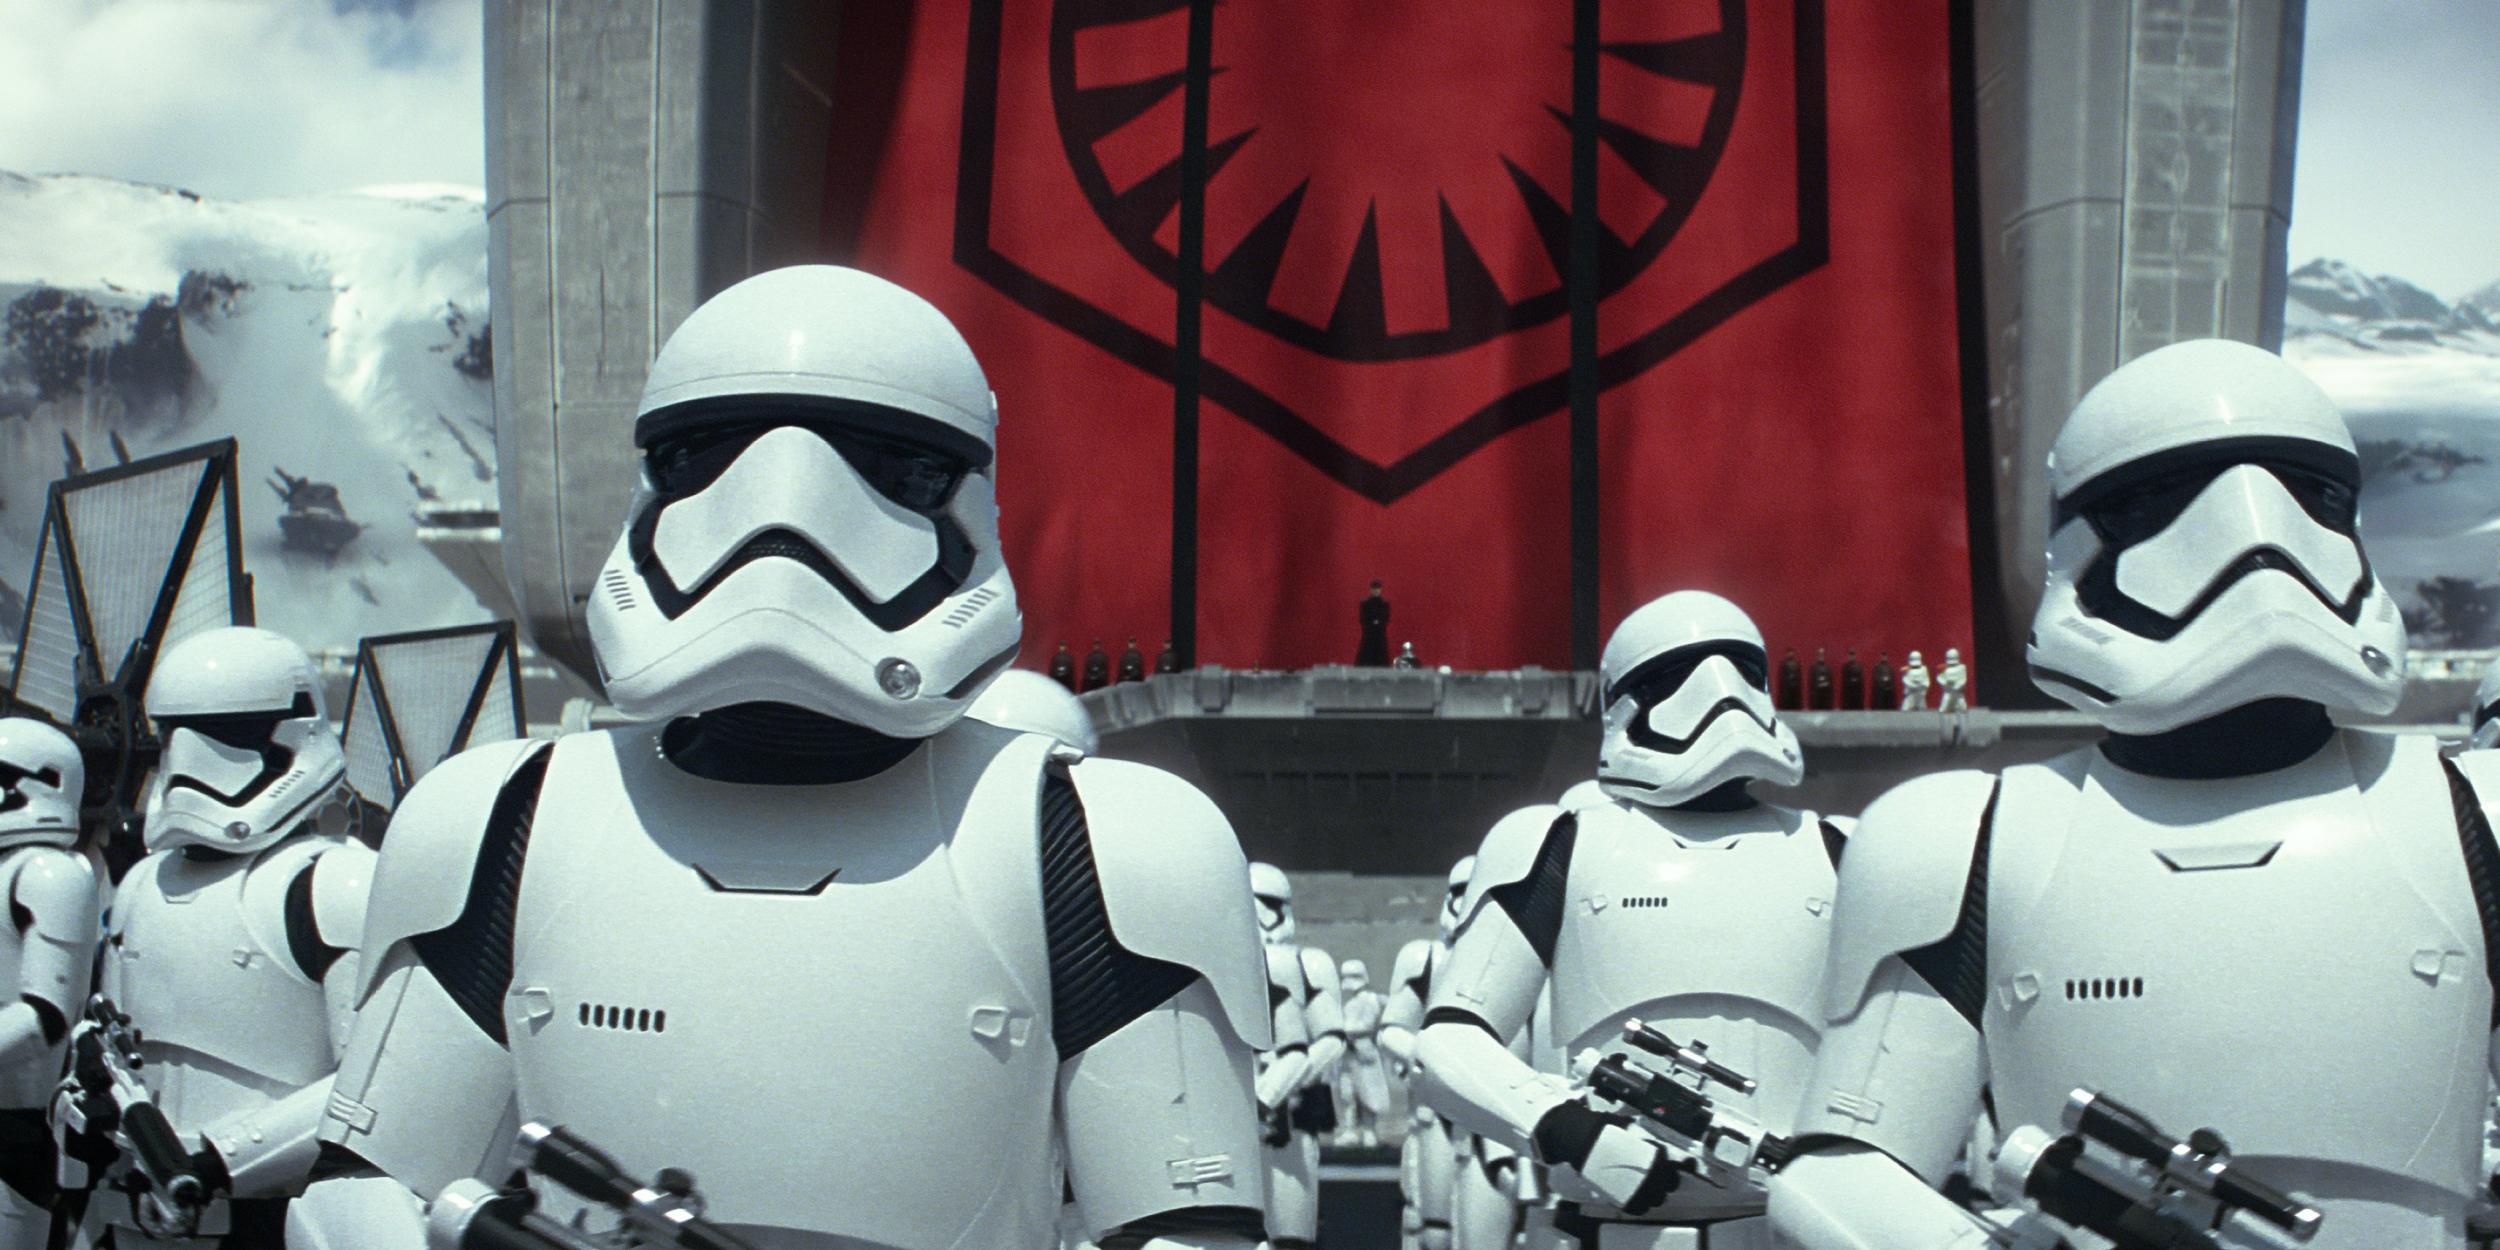 Stormtroopers in ‘Star Wars: The Force Awakens’